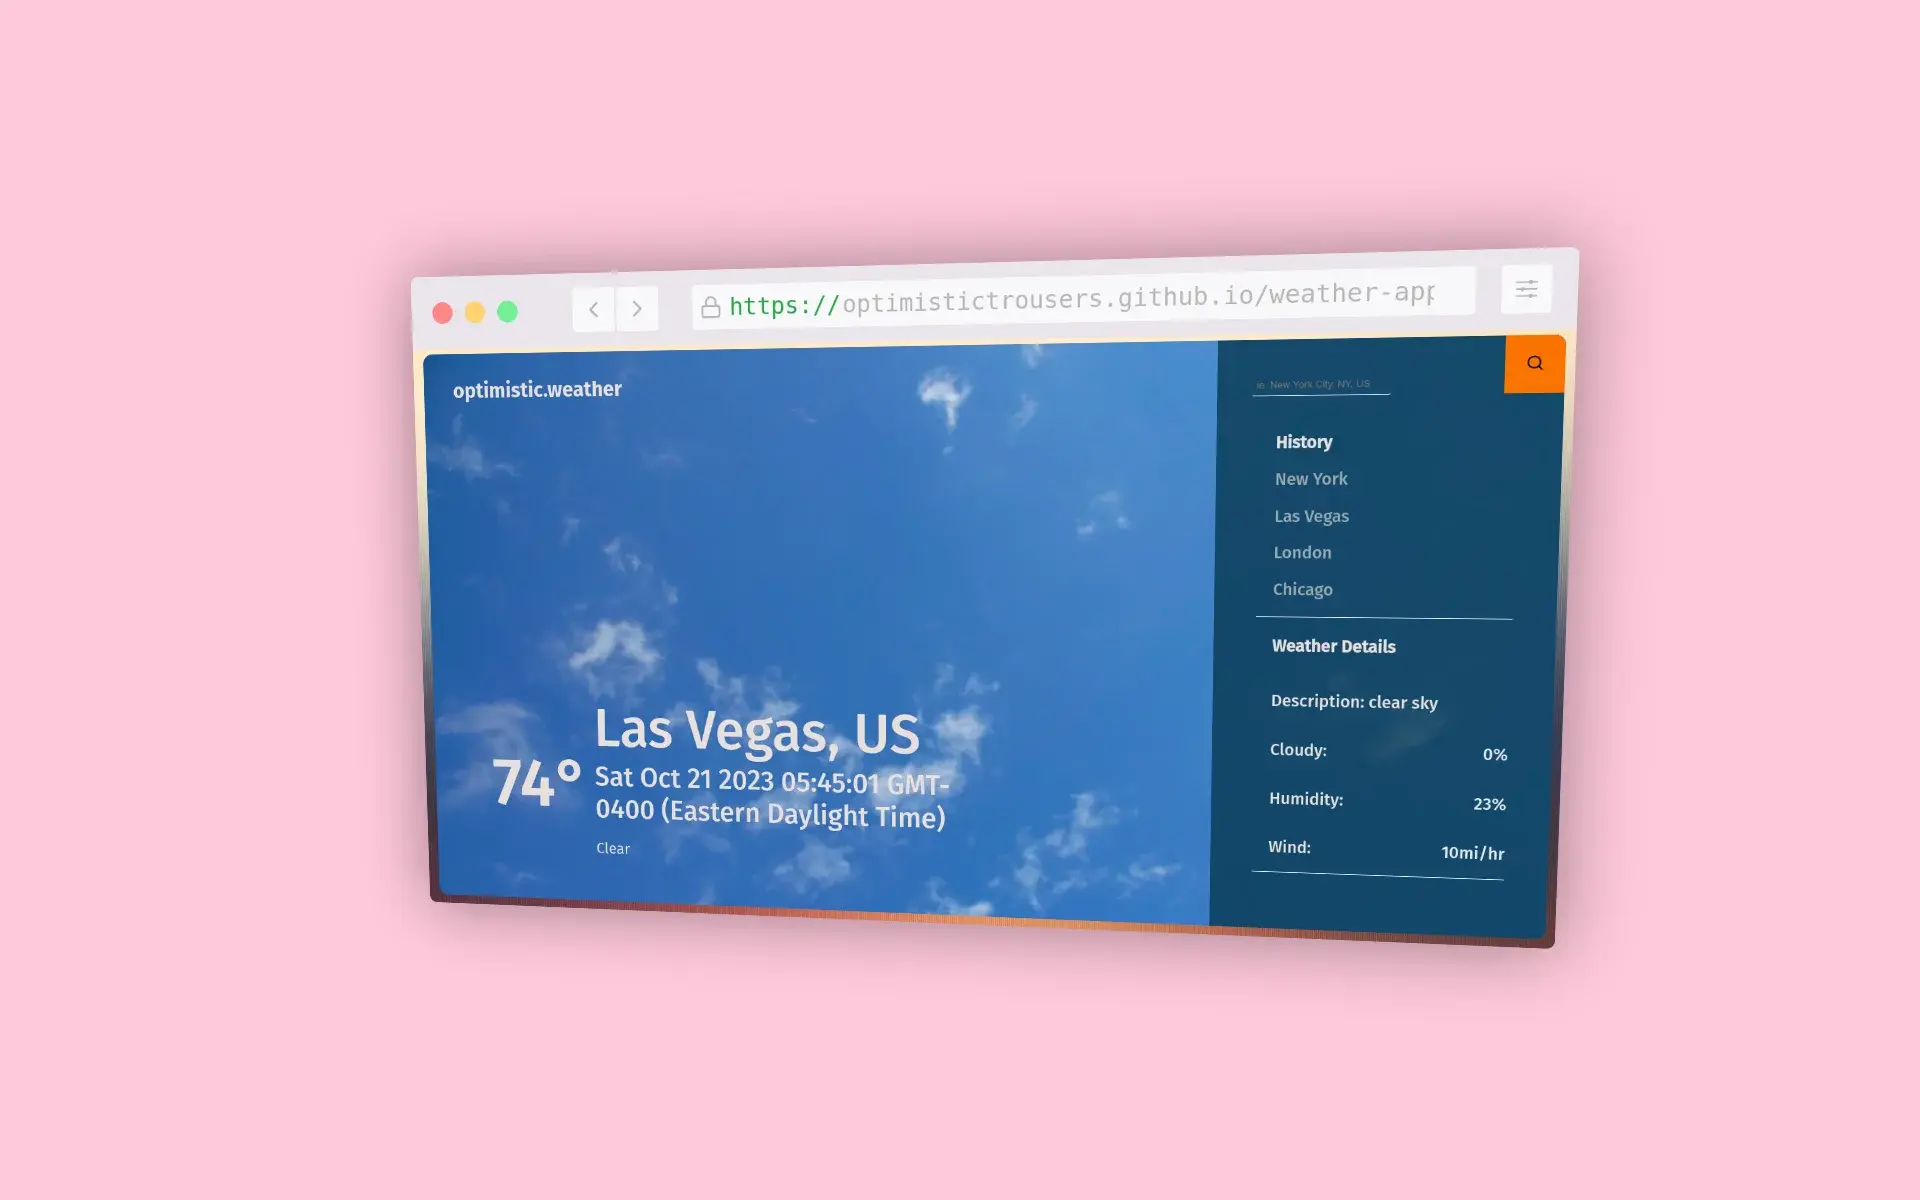 Weather web app displaying current conditions for Las Vegas, US. Features search functionality and recent search history.